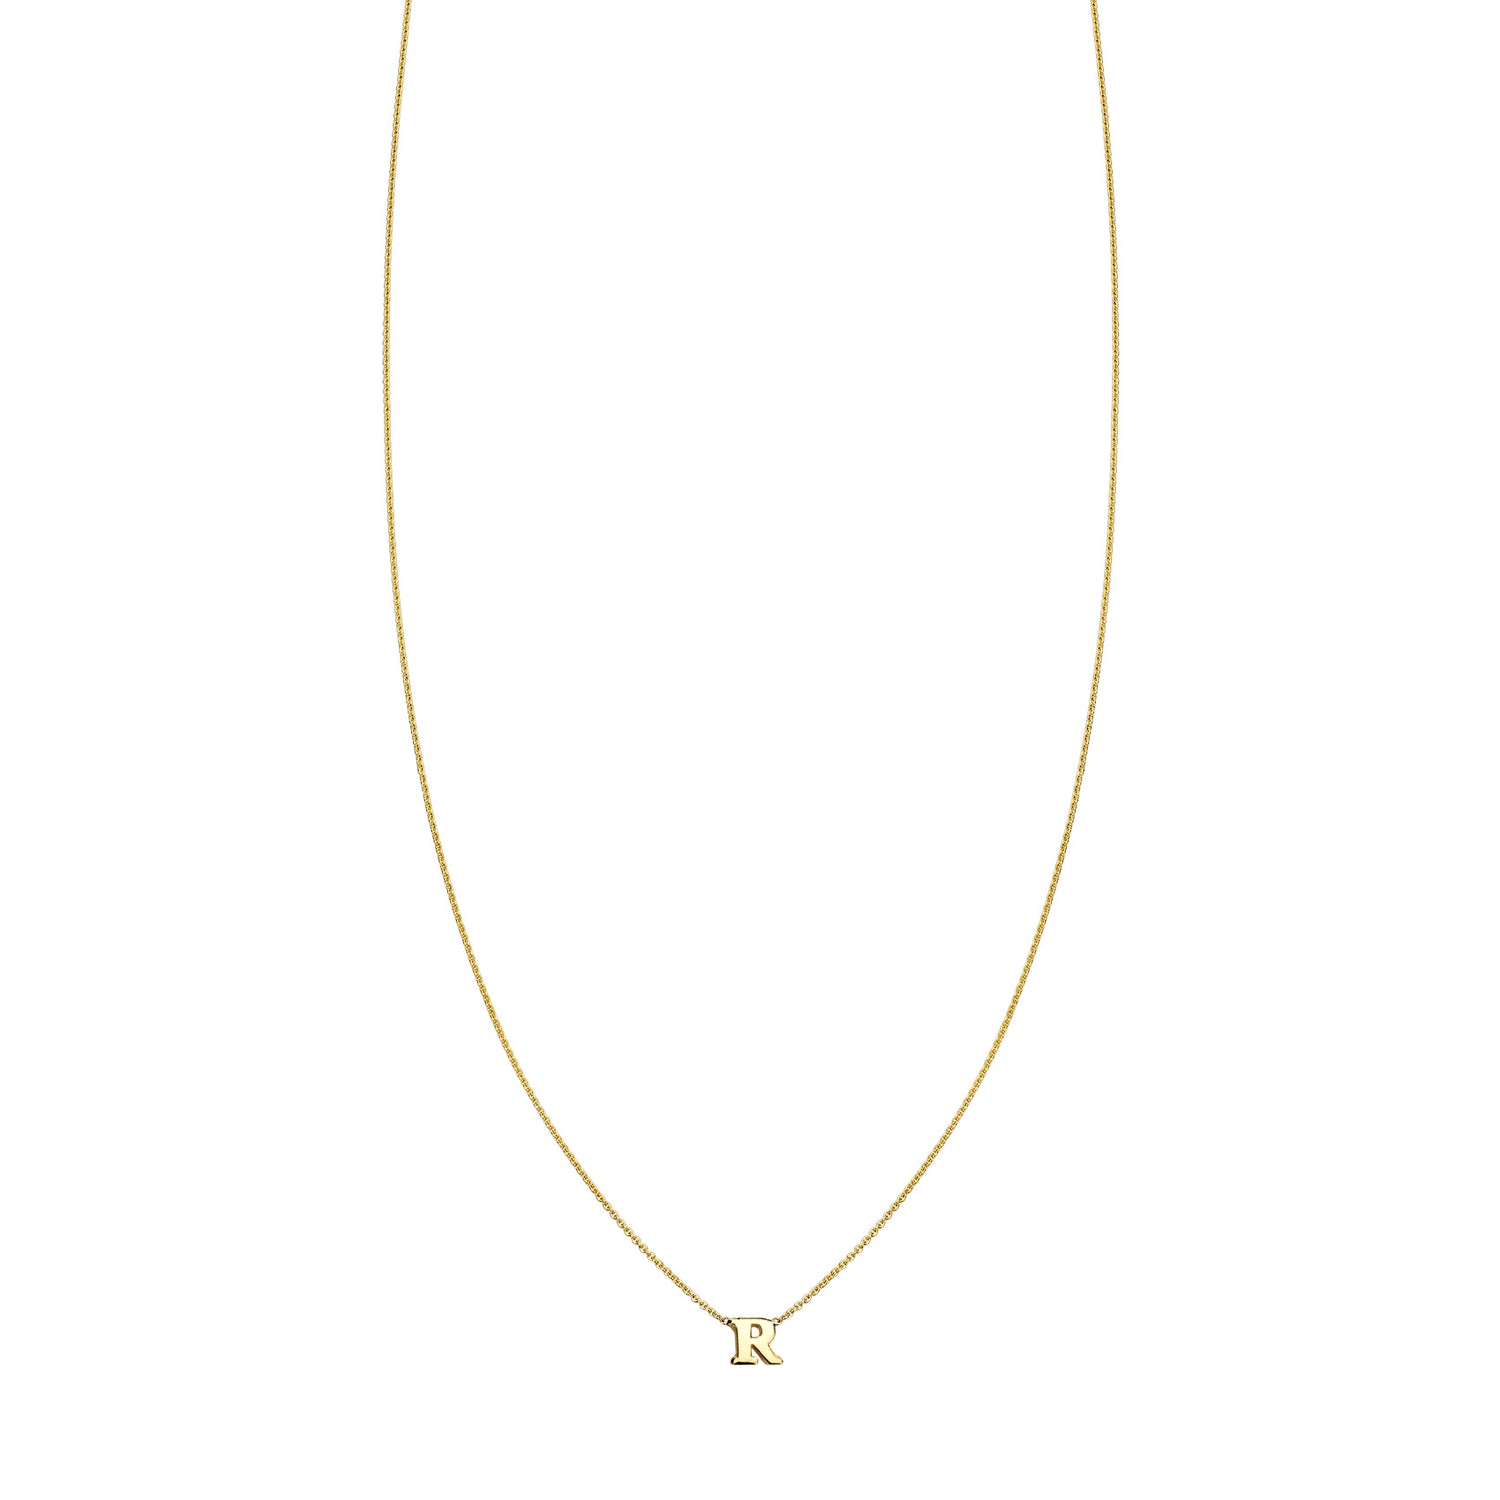 image of gold initial necklace PRN 019 R